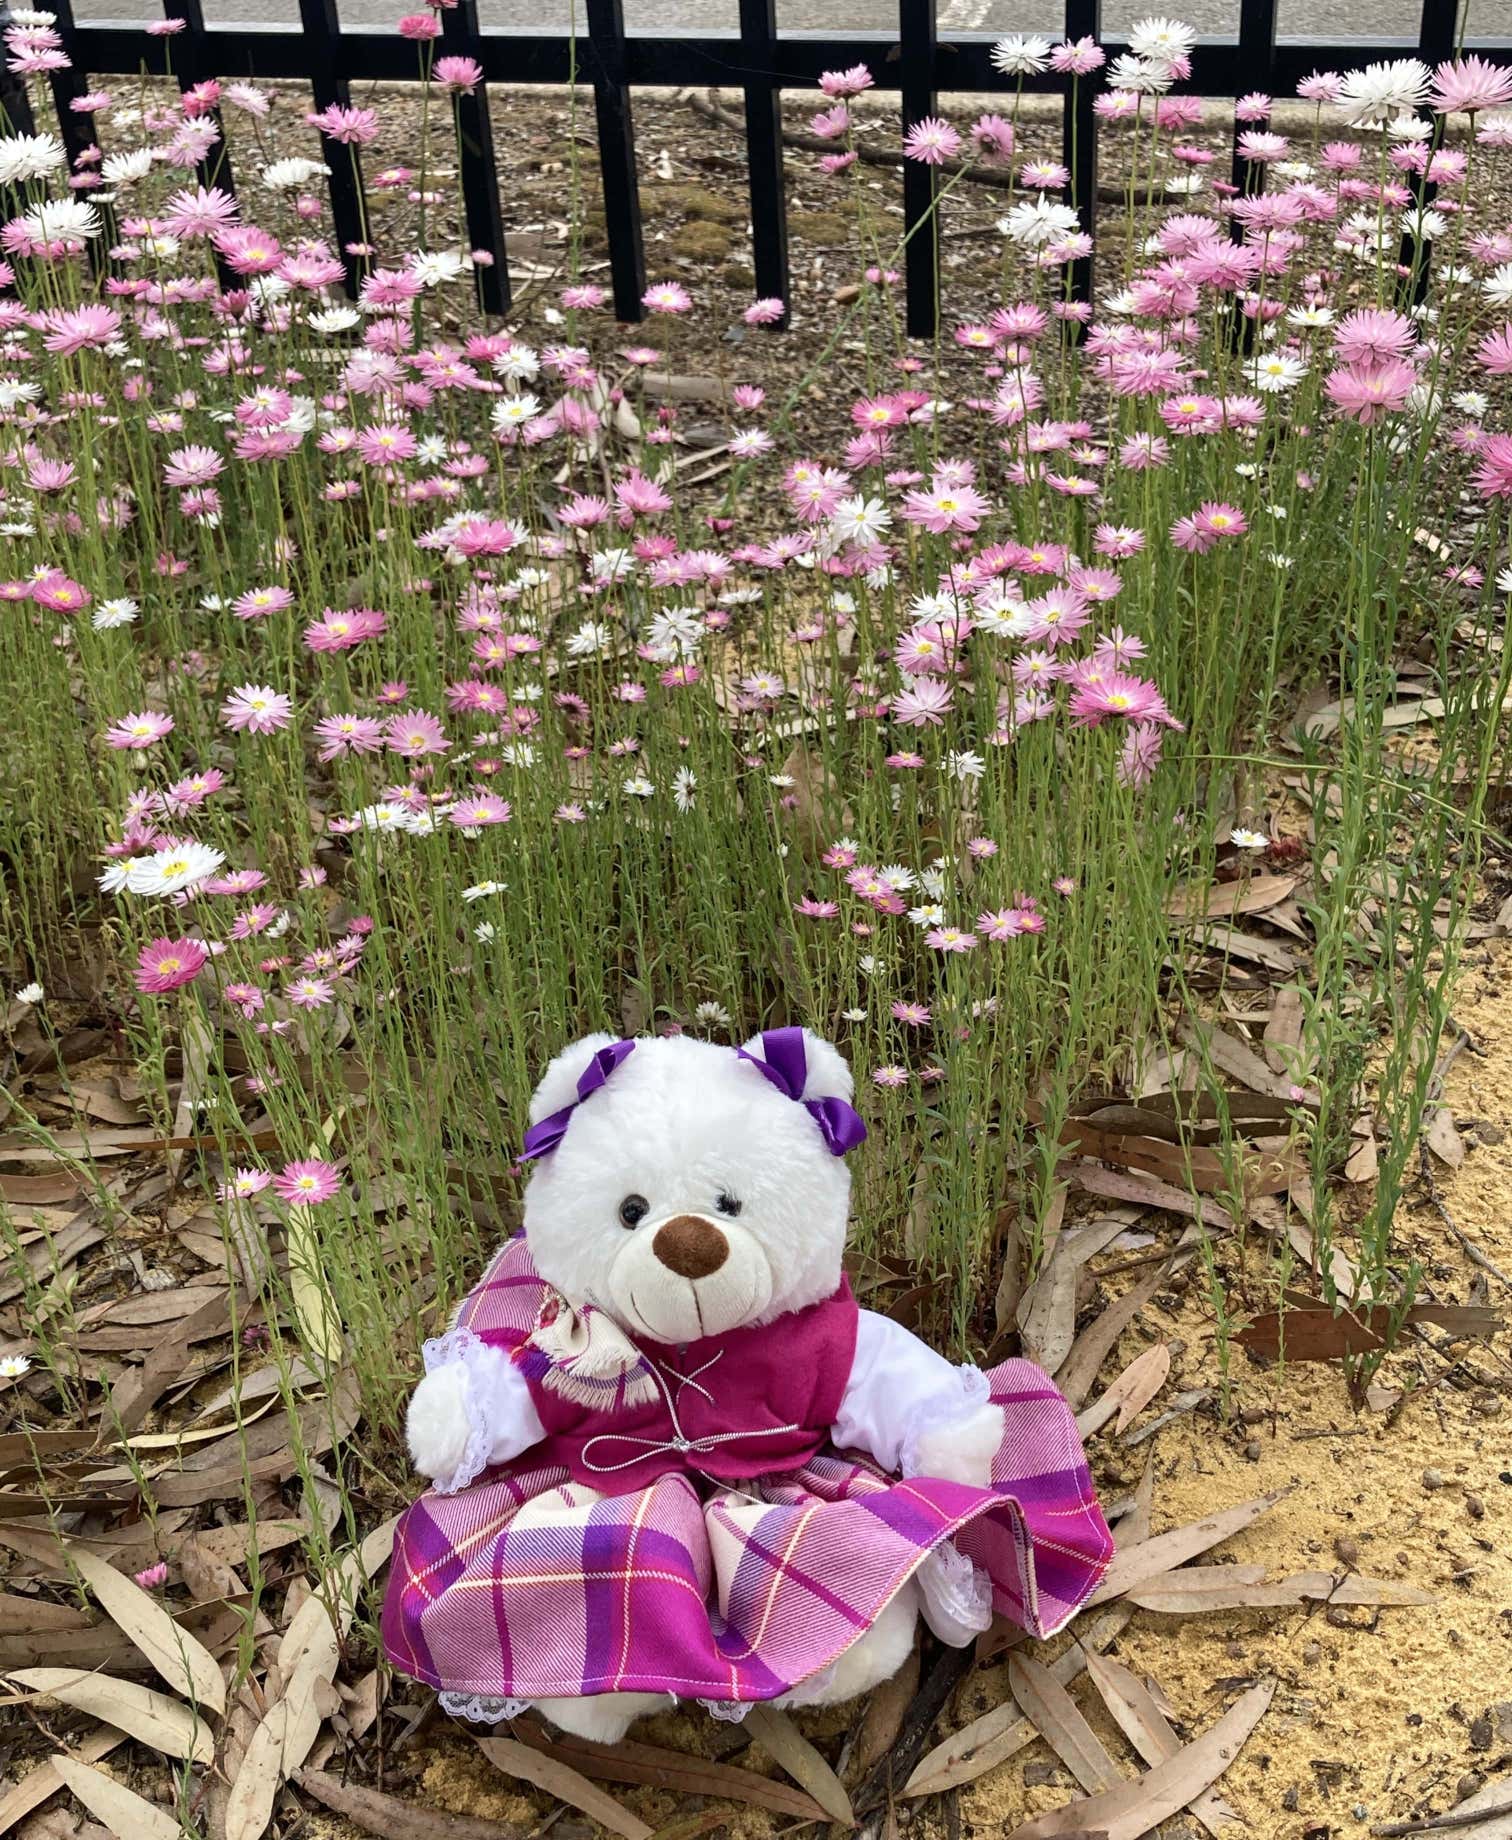 White Teddybear wearing pink/purple dress surrounded by pink and white flowers